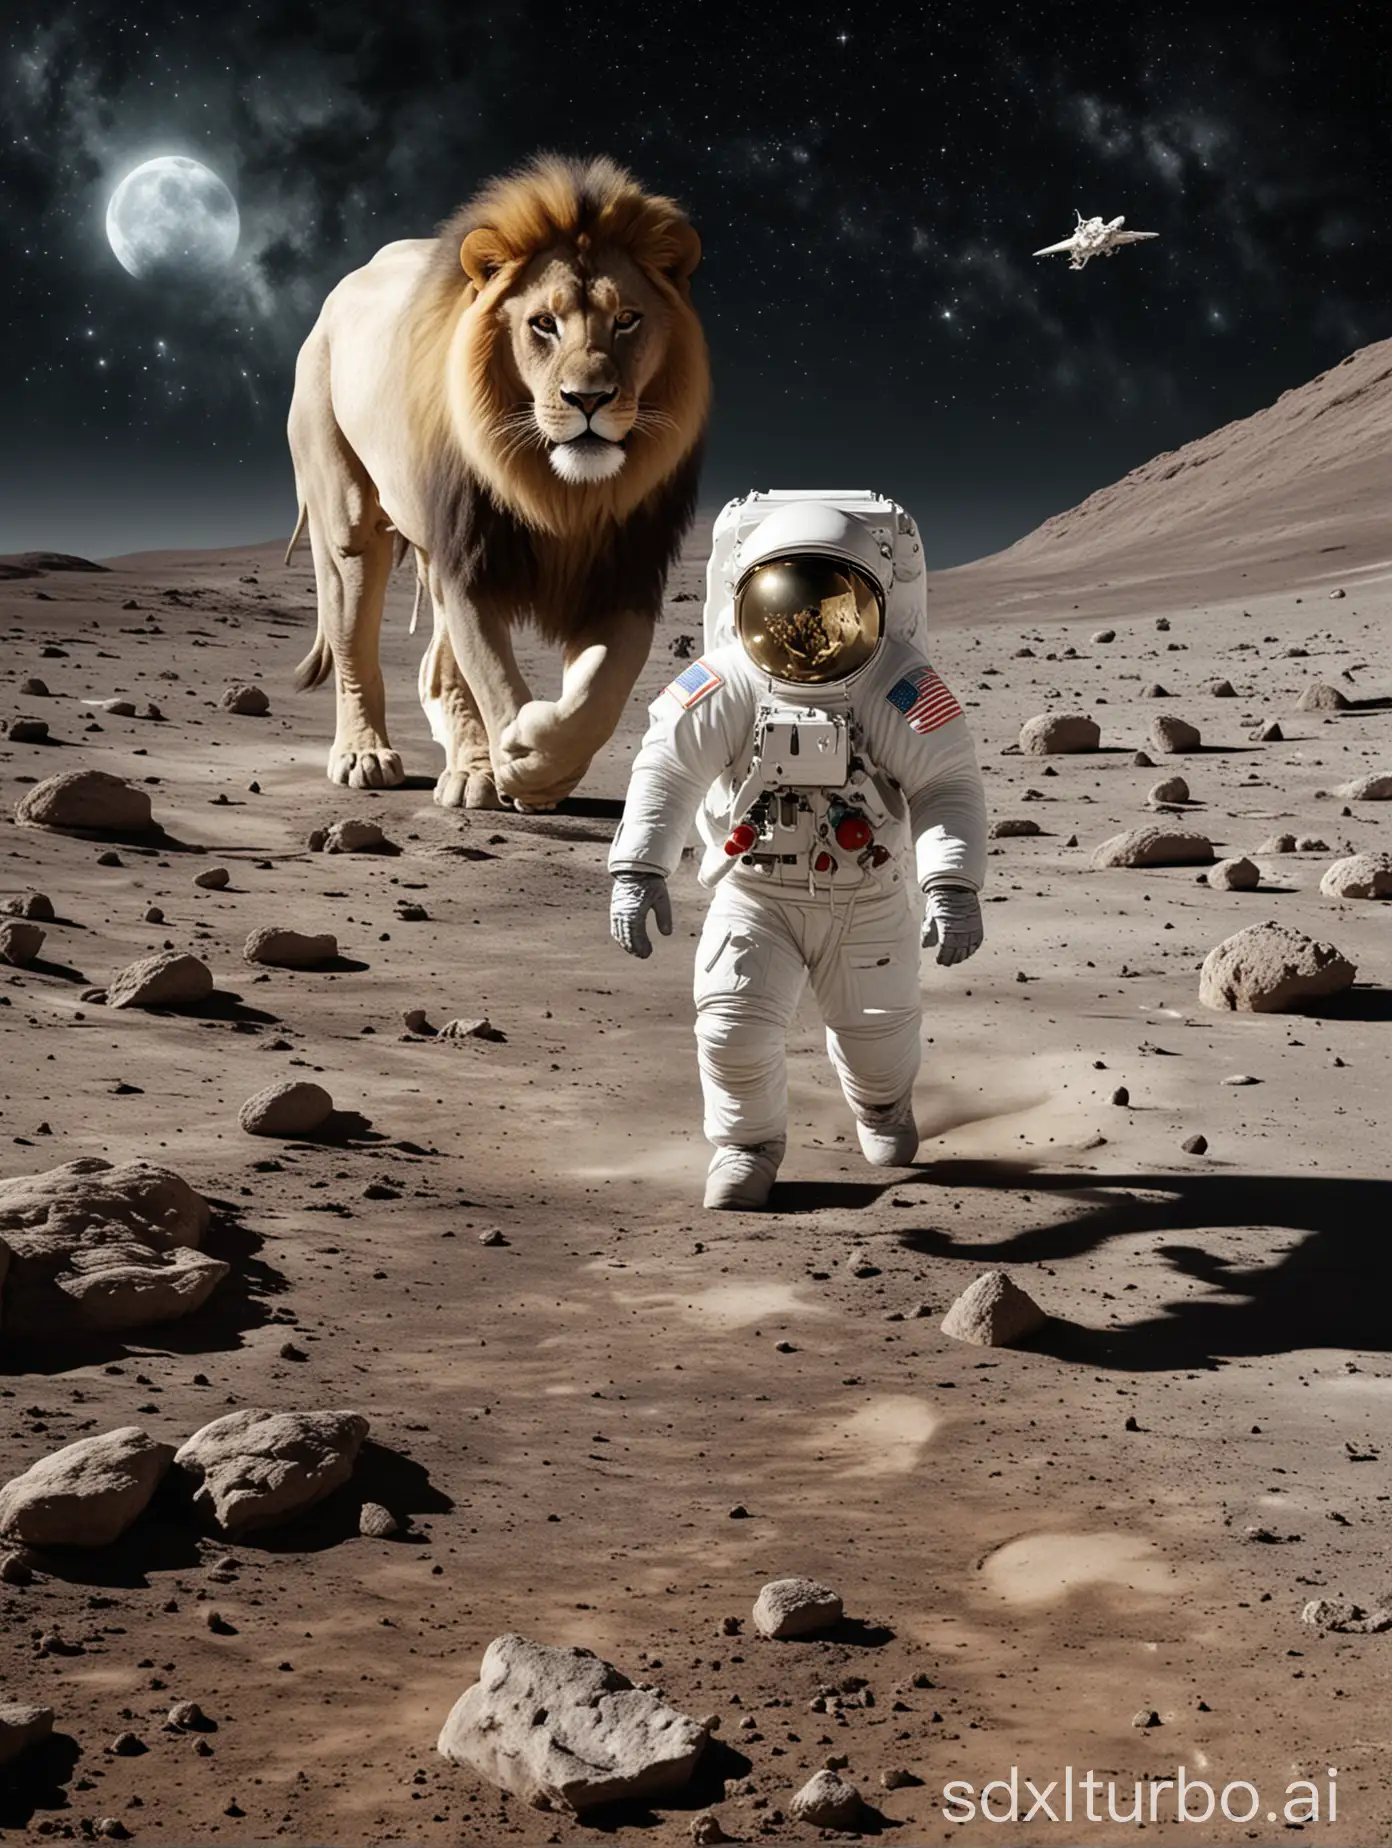 Astronauts in the moon walking towards a lion with white wings